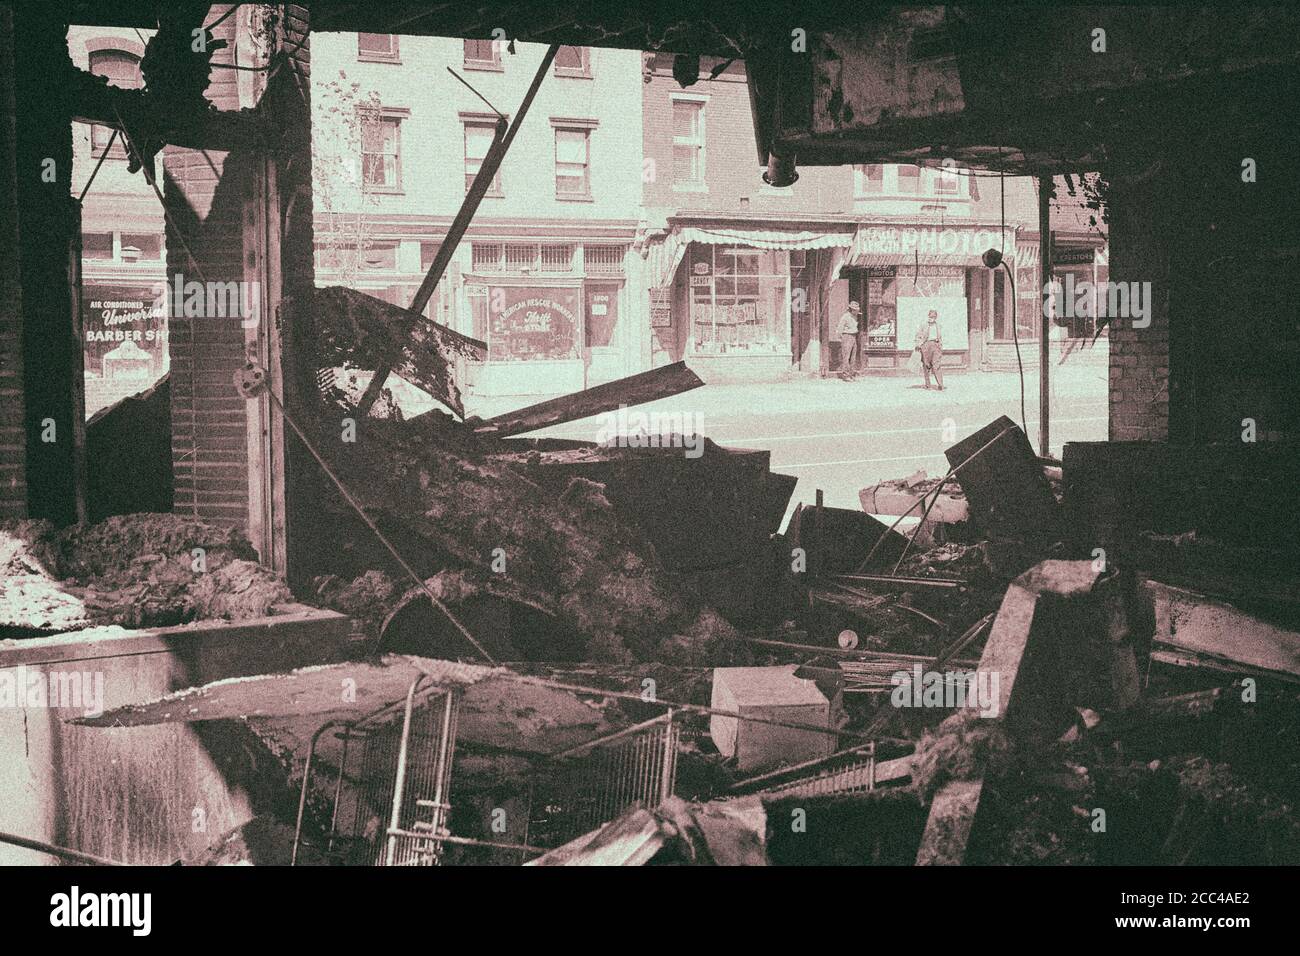 Riot damage in D.C. April, 1968 Retro photo of the ruins of a store in Washington, D.C., that was destroyed during the riots that followed the assassi Stock Photo